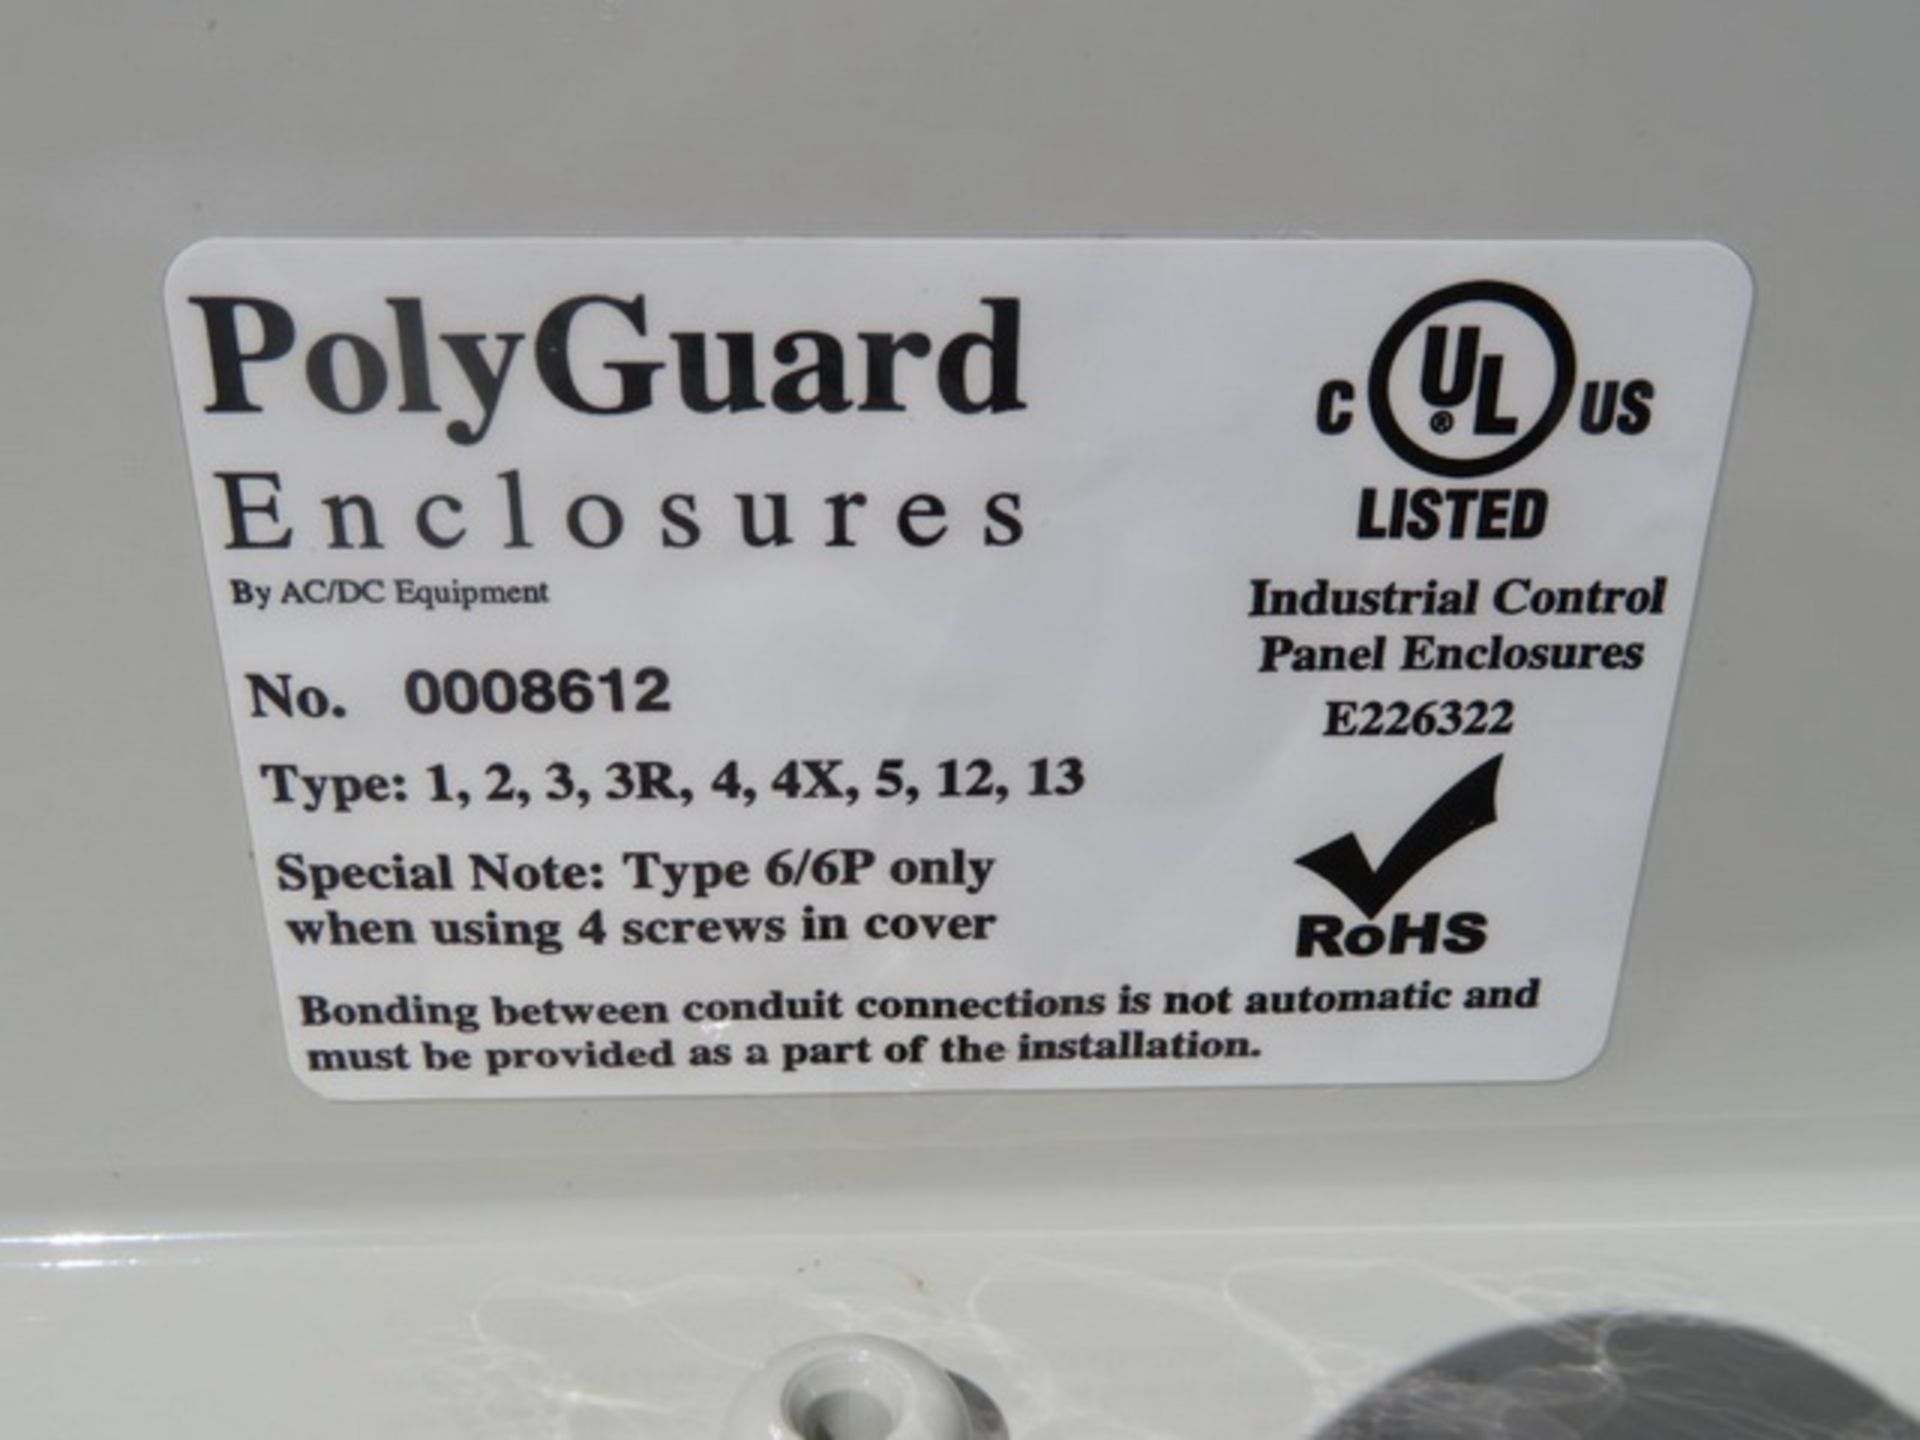 ACDC Equipment Co. PC-161407-HOLF Lot: Approx. (120) 16" x 14" x 7" Polycarbonate Enclosures. - Image 3 of 9